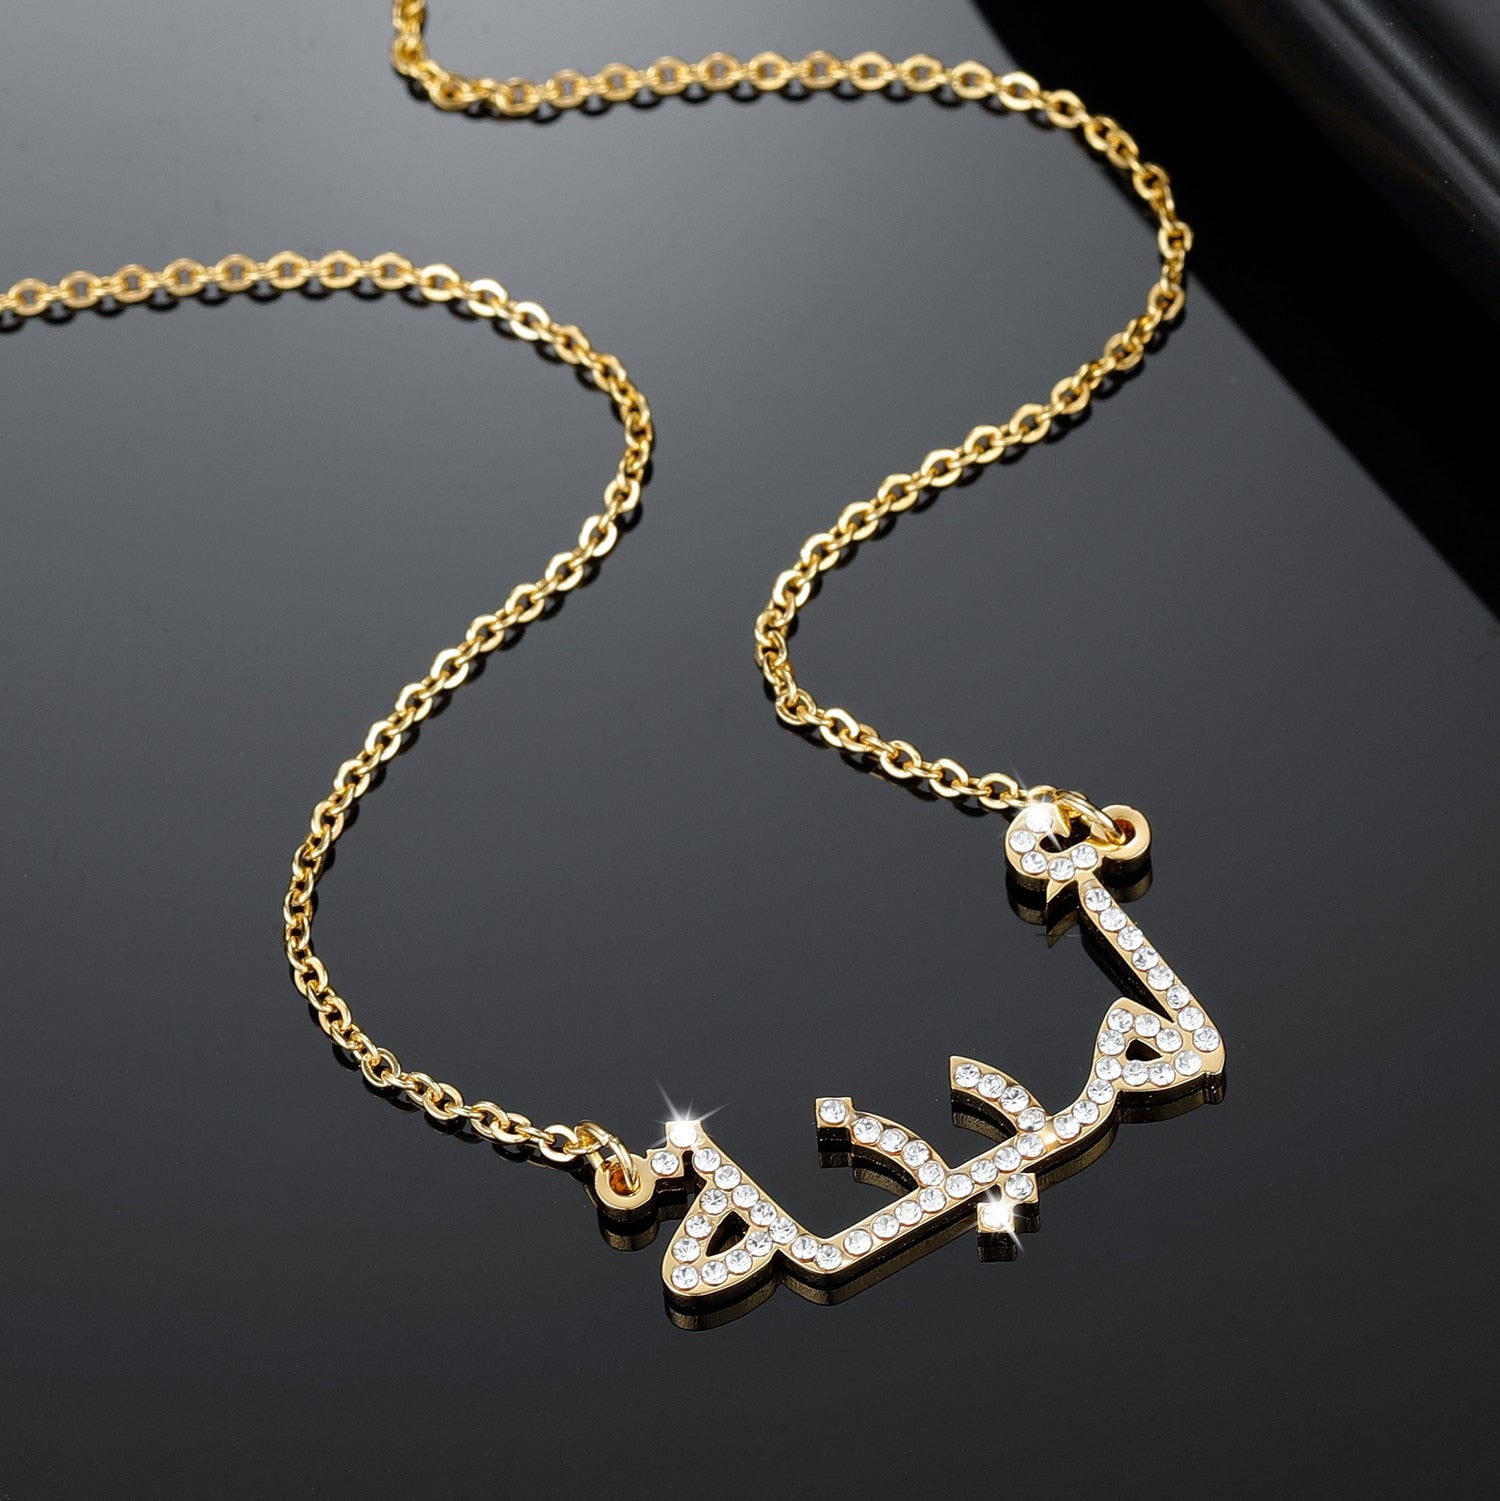 Personalized Arabic Crystal Name Necklace - Arabic Name Jewellery